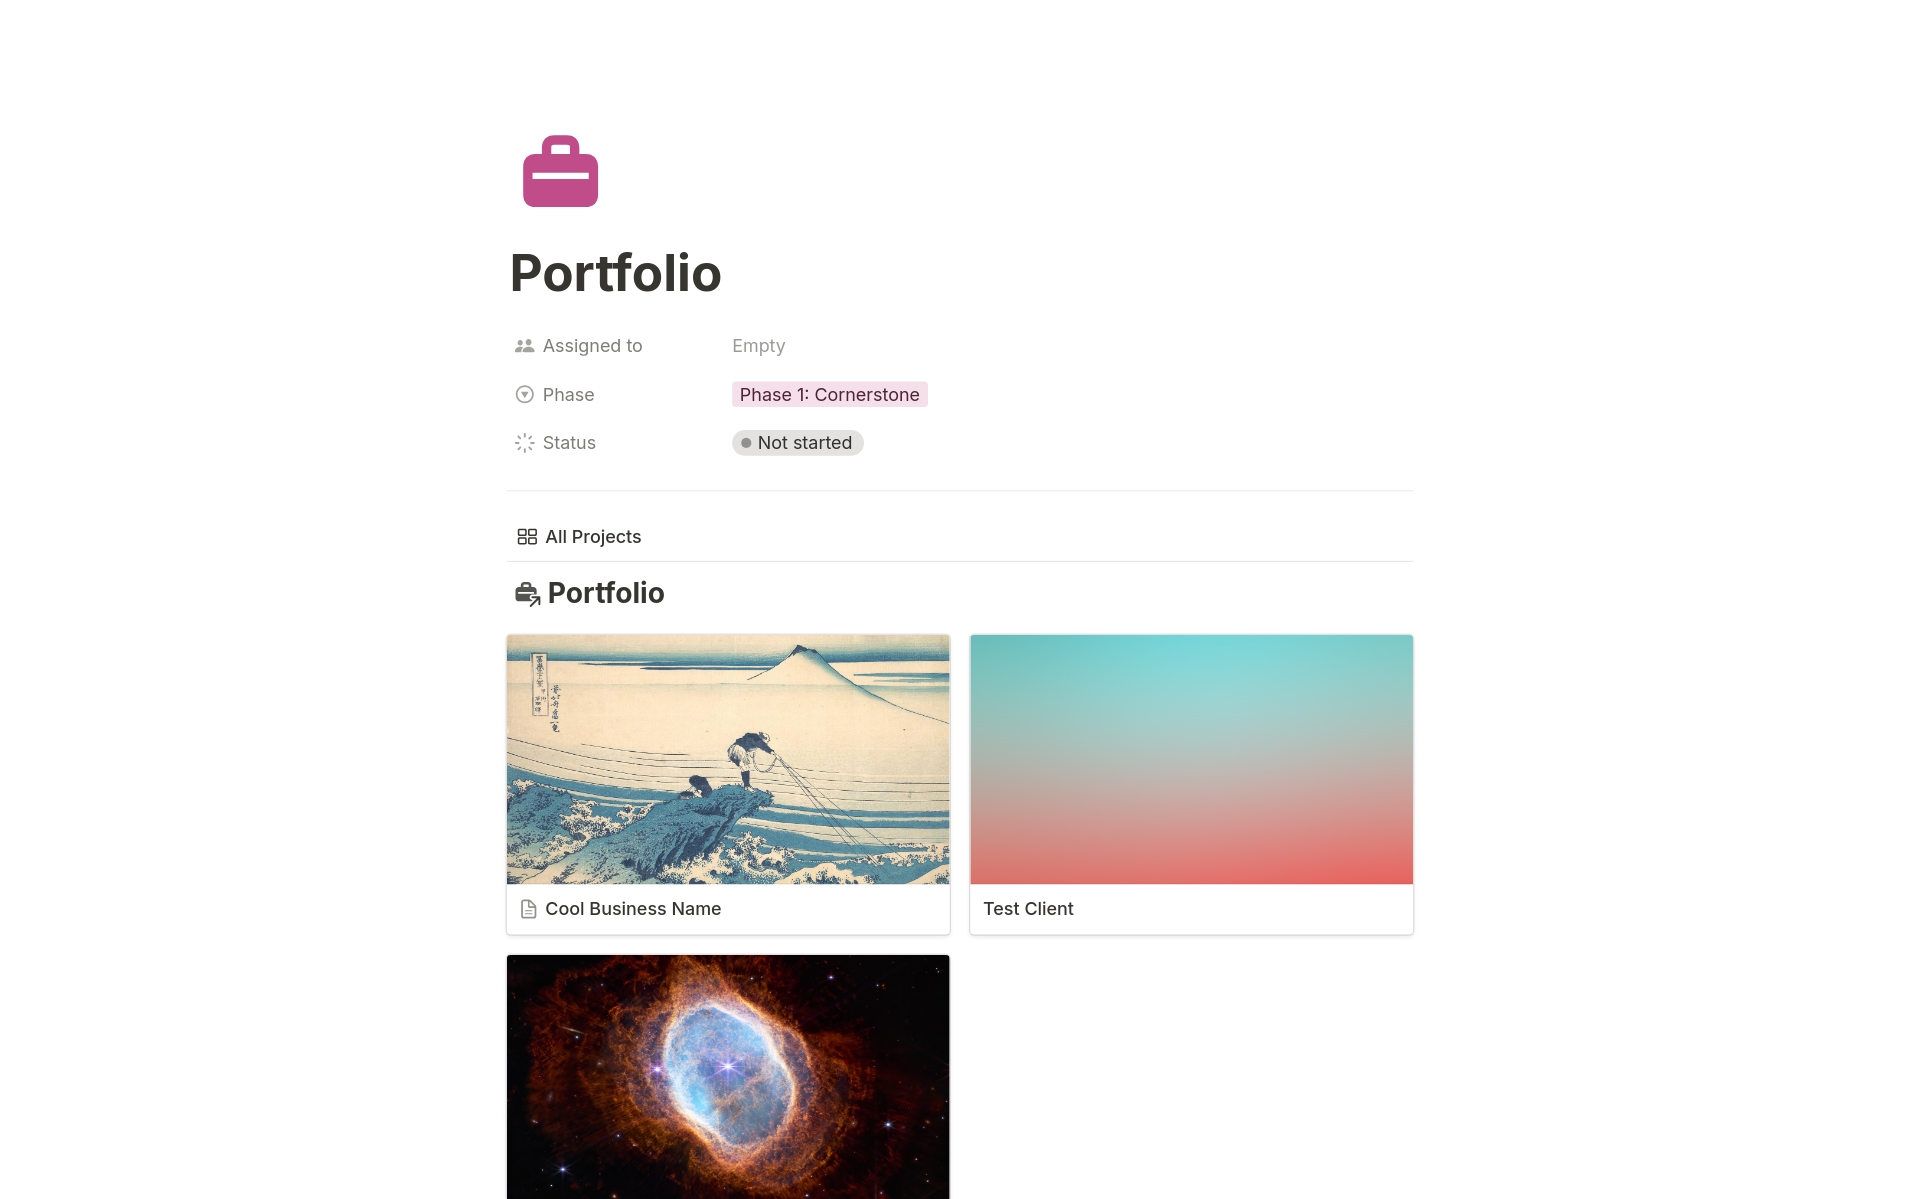 Ready to transform your portfolio? Get the Website Planner template to create stunning websites that convert visitors to clients. Elevate your client journey from lead gen to loyalty with a well-planned portfolio website.